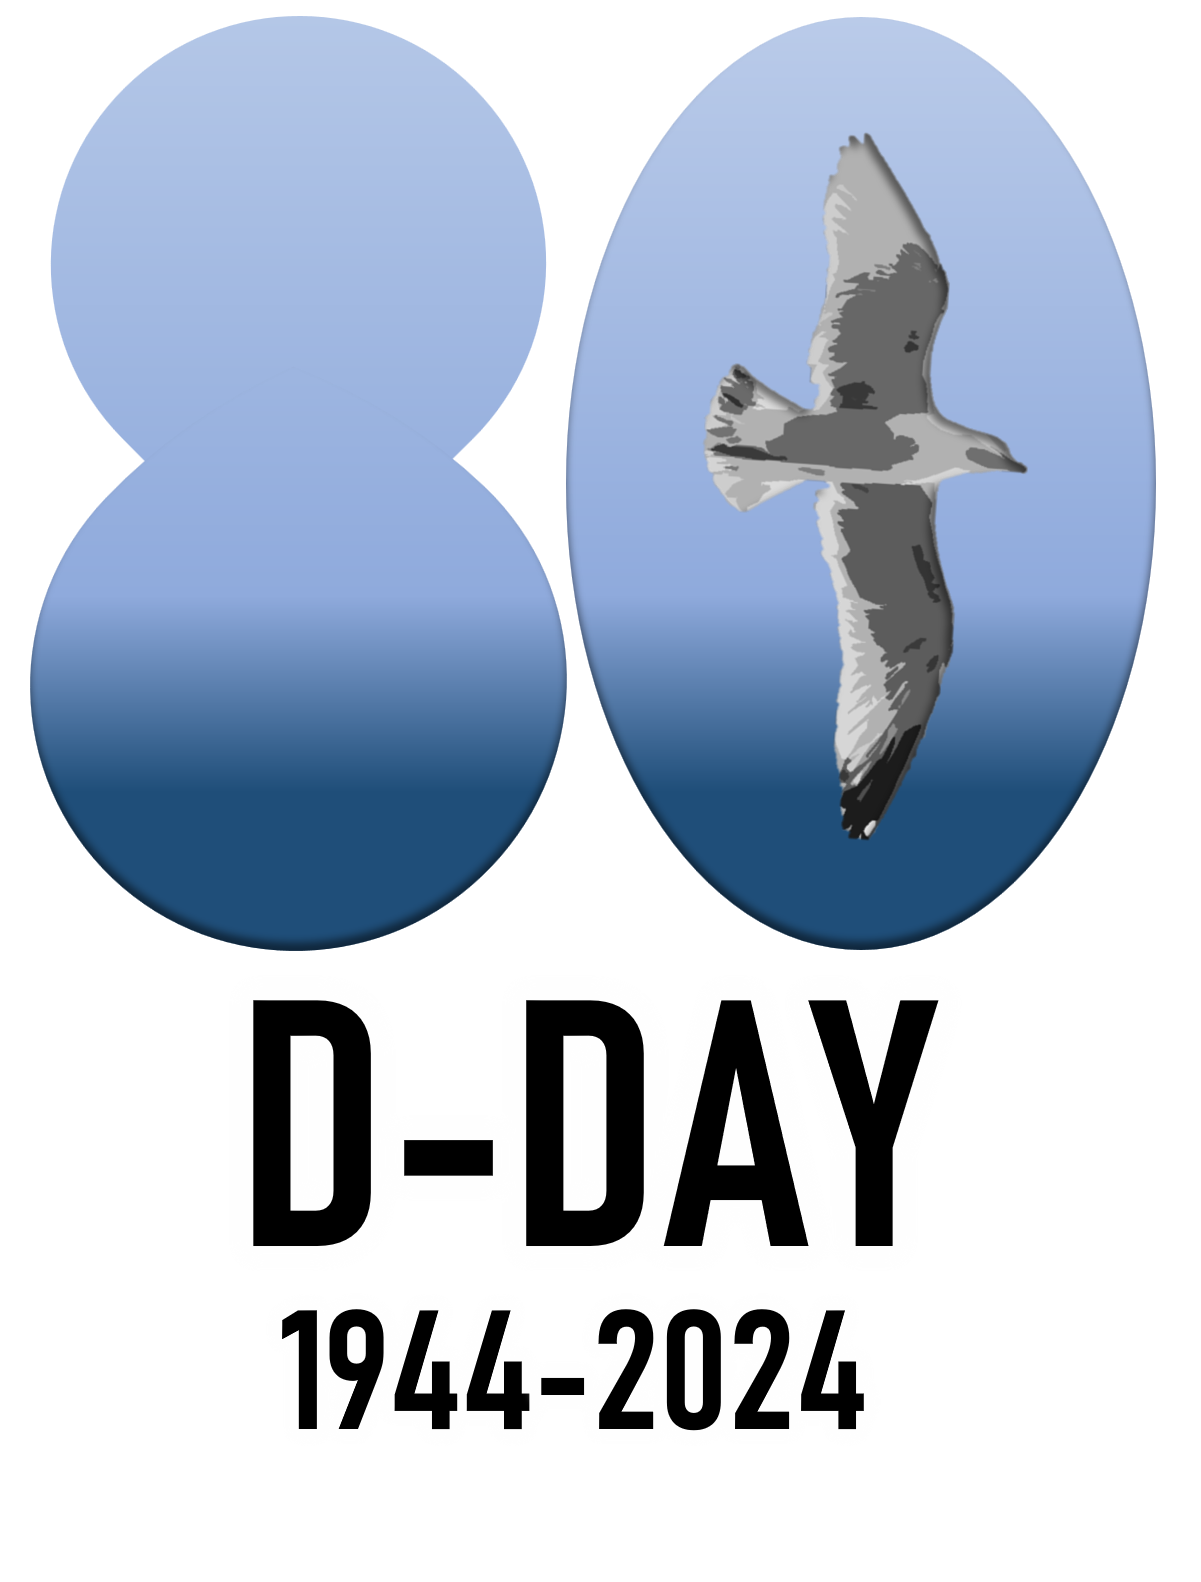 80th anniversary of DDay Commemorations 2024 of the Normandy landings